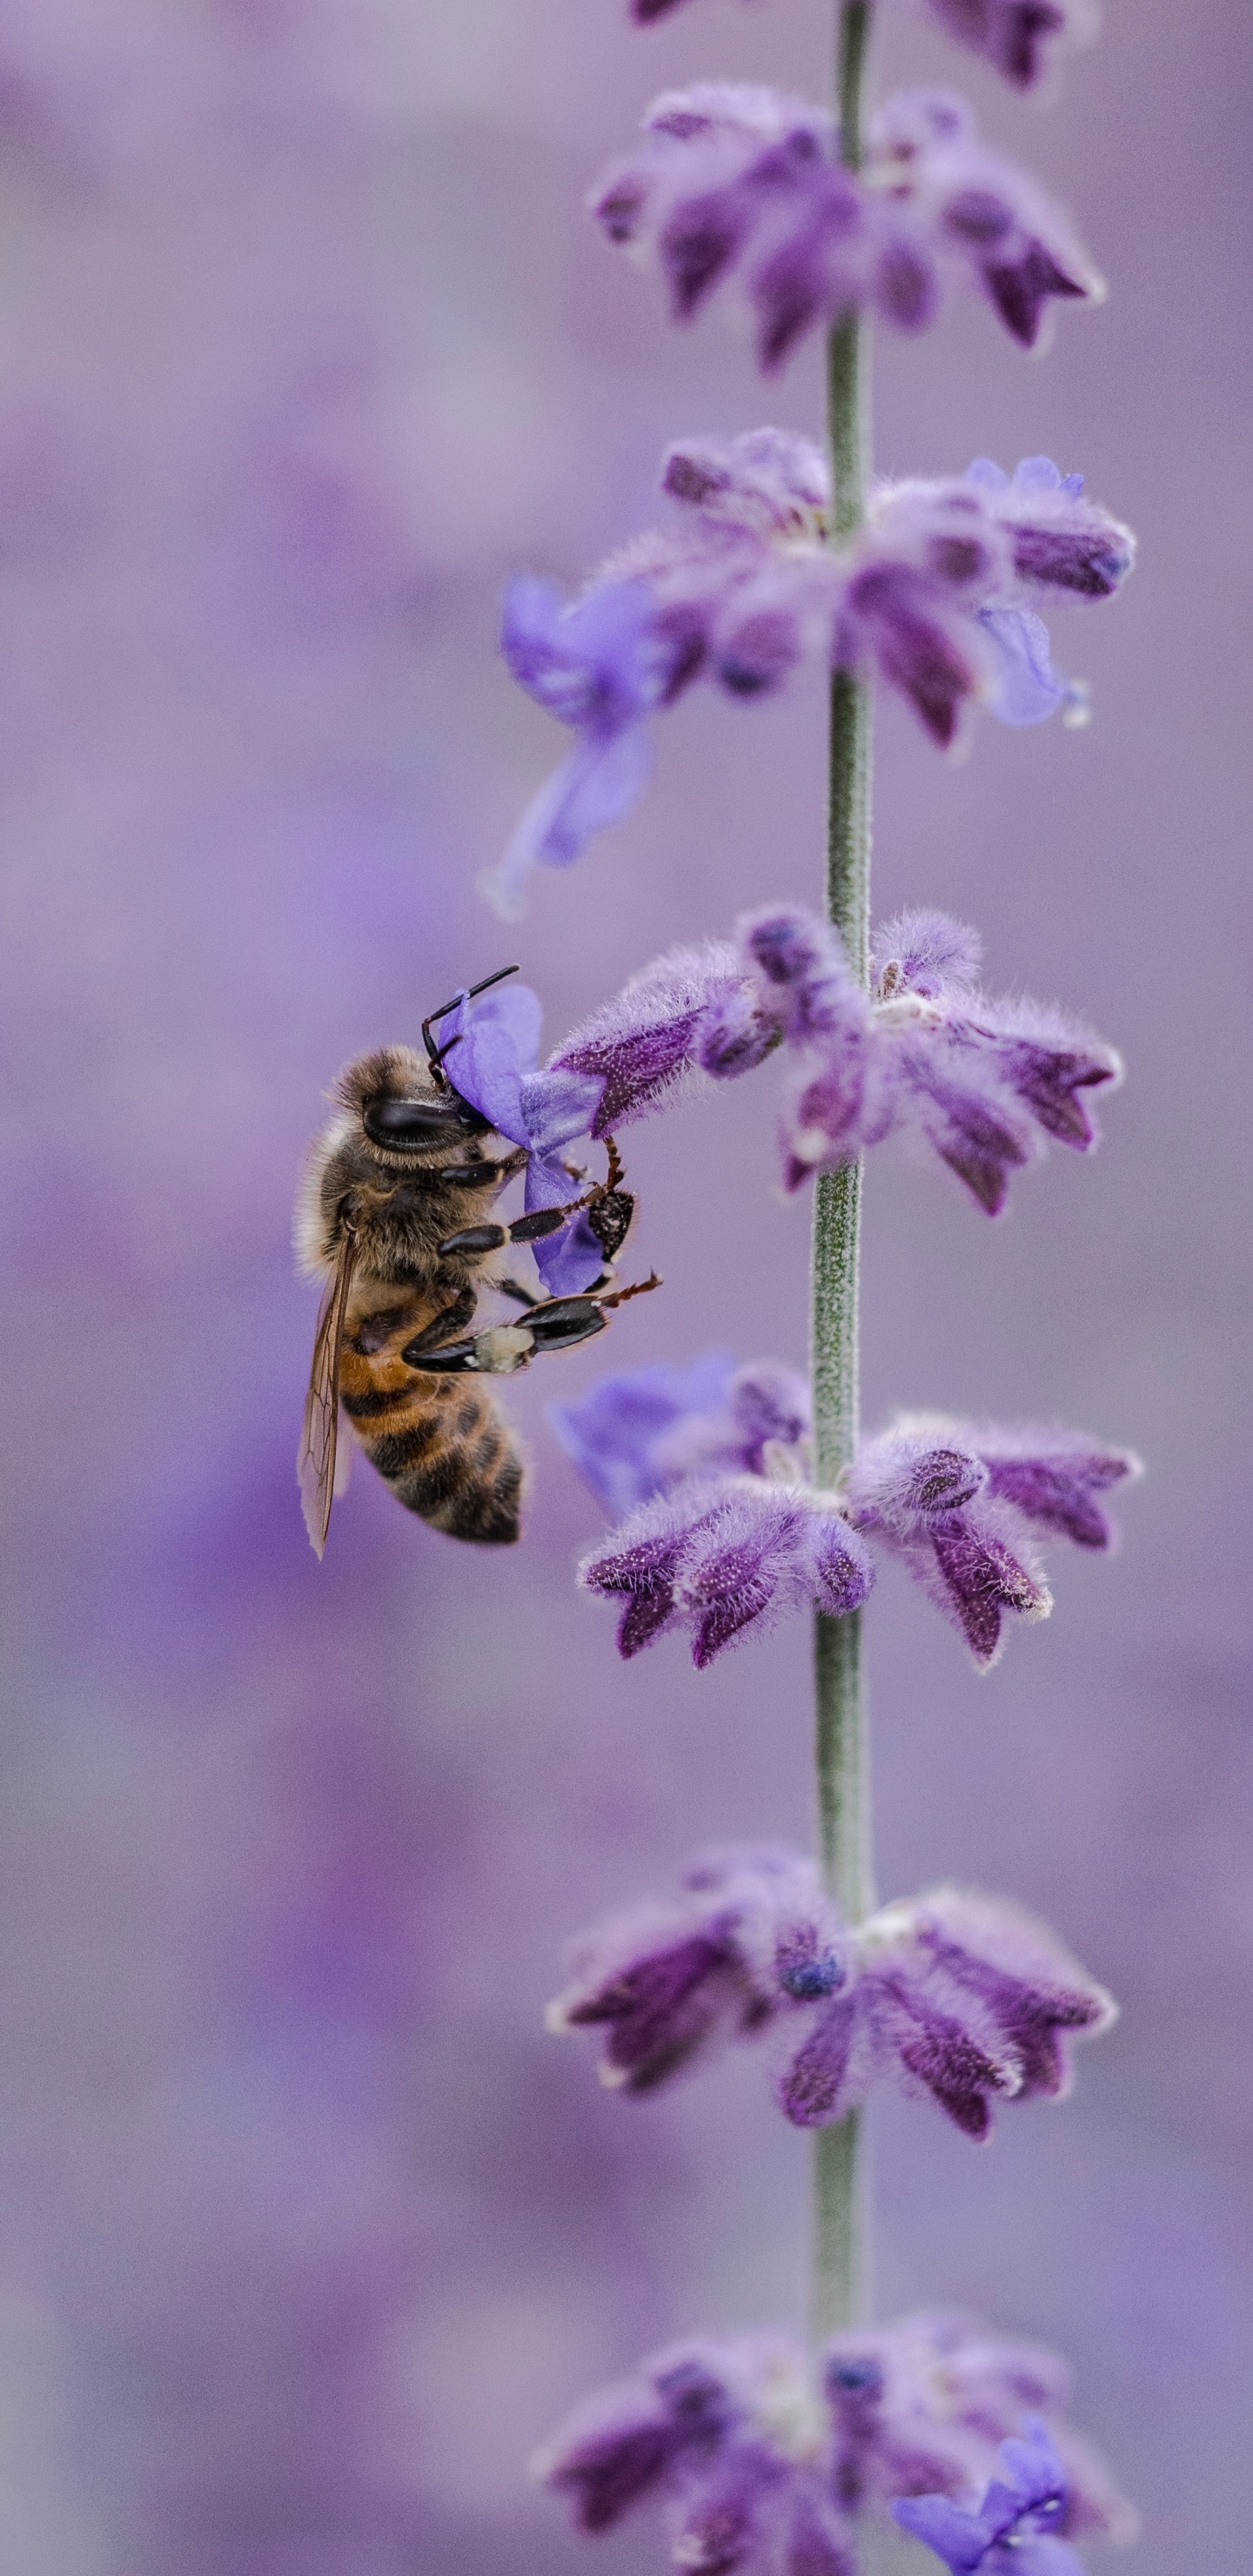 Yellow and Black Bee on Purple Flower. Wallpaper in 1440x2960 Resolution